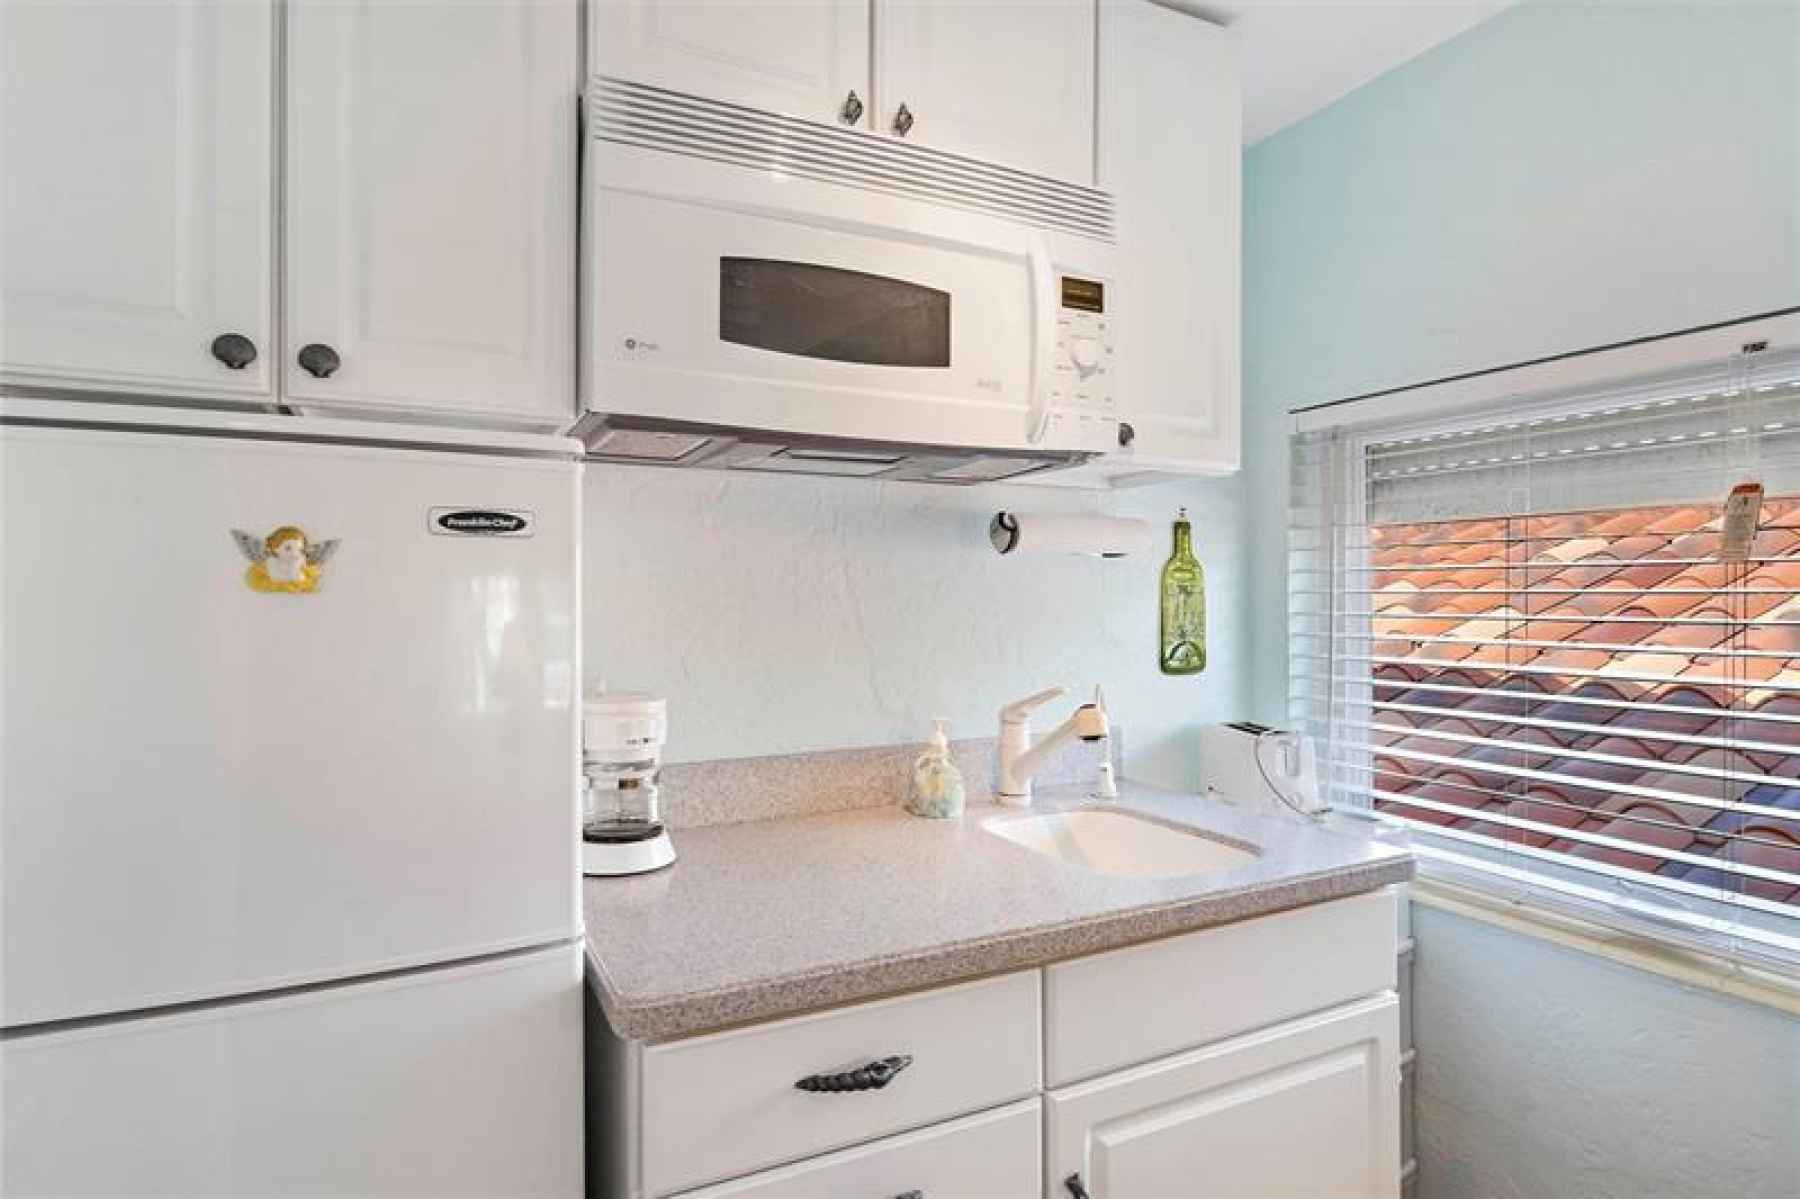 Apartment kitchenette with ample storage